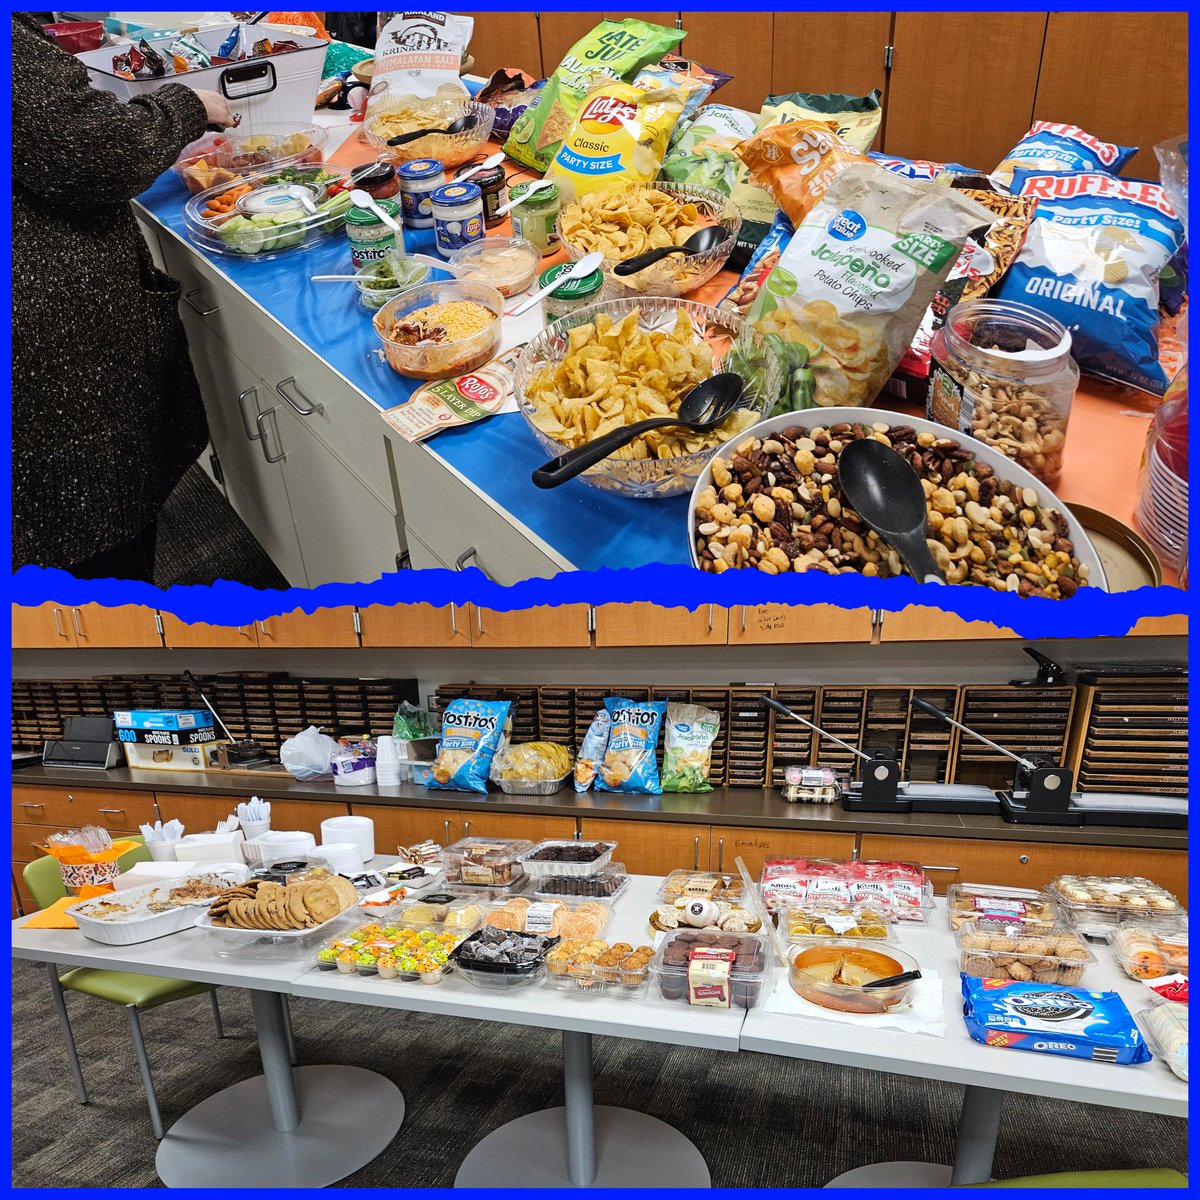 Astros #Sweet VS. #Salty day! Our staff @CFISDWilson showed up! Looks like SWEETS won! 🧡💙 Let's go, #astros #sweettreats #saltysnacks